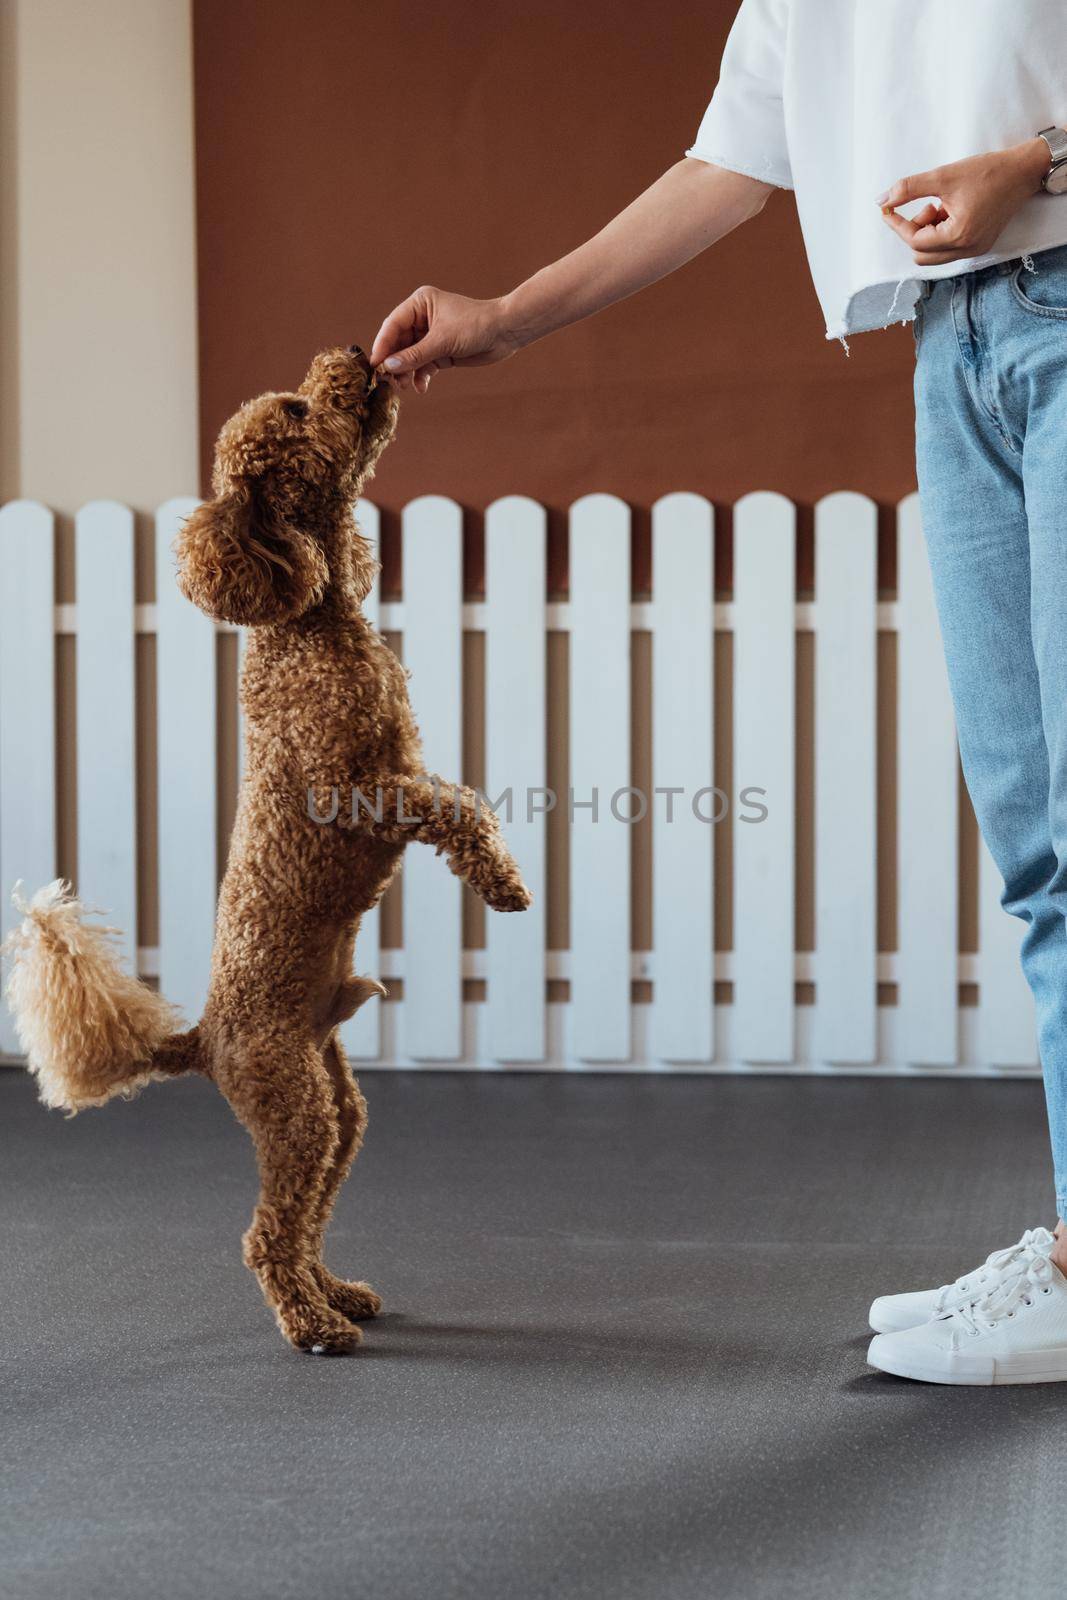 Brown Poodle training in pet house with dog trainer